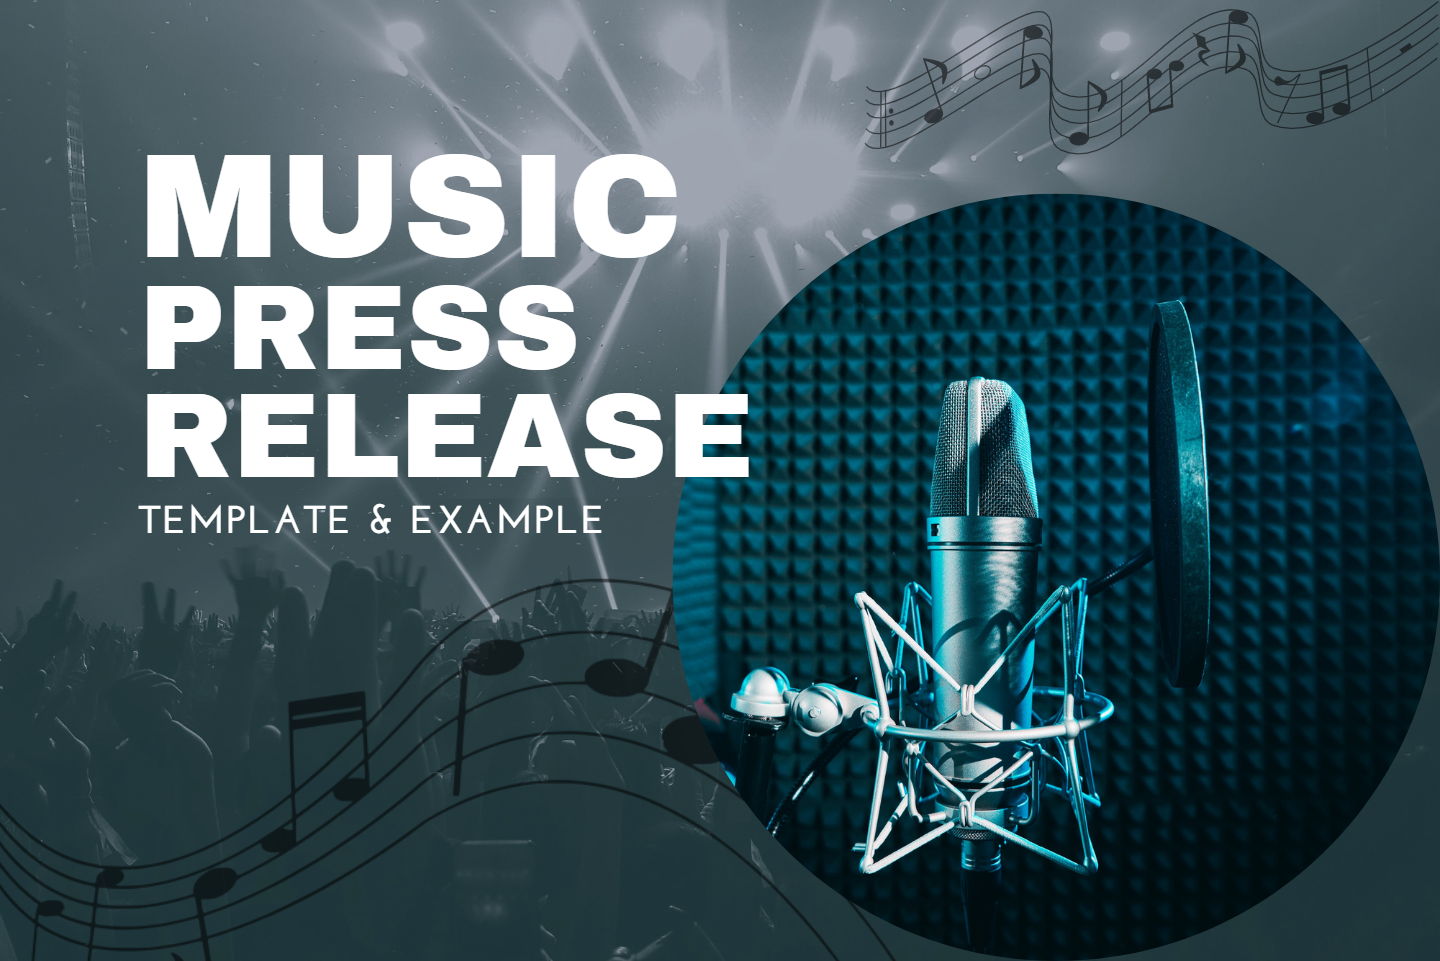 Music Press Release Template, Guide & Example